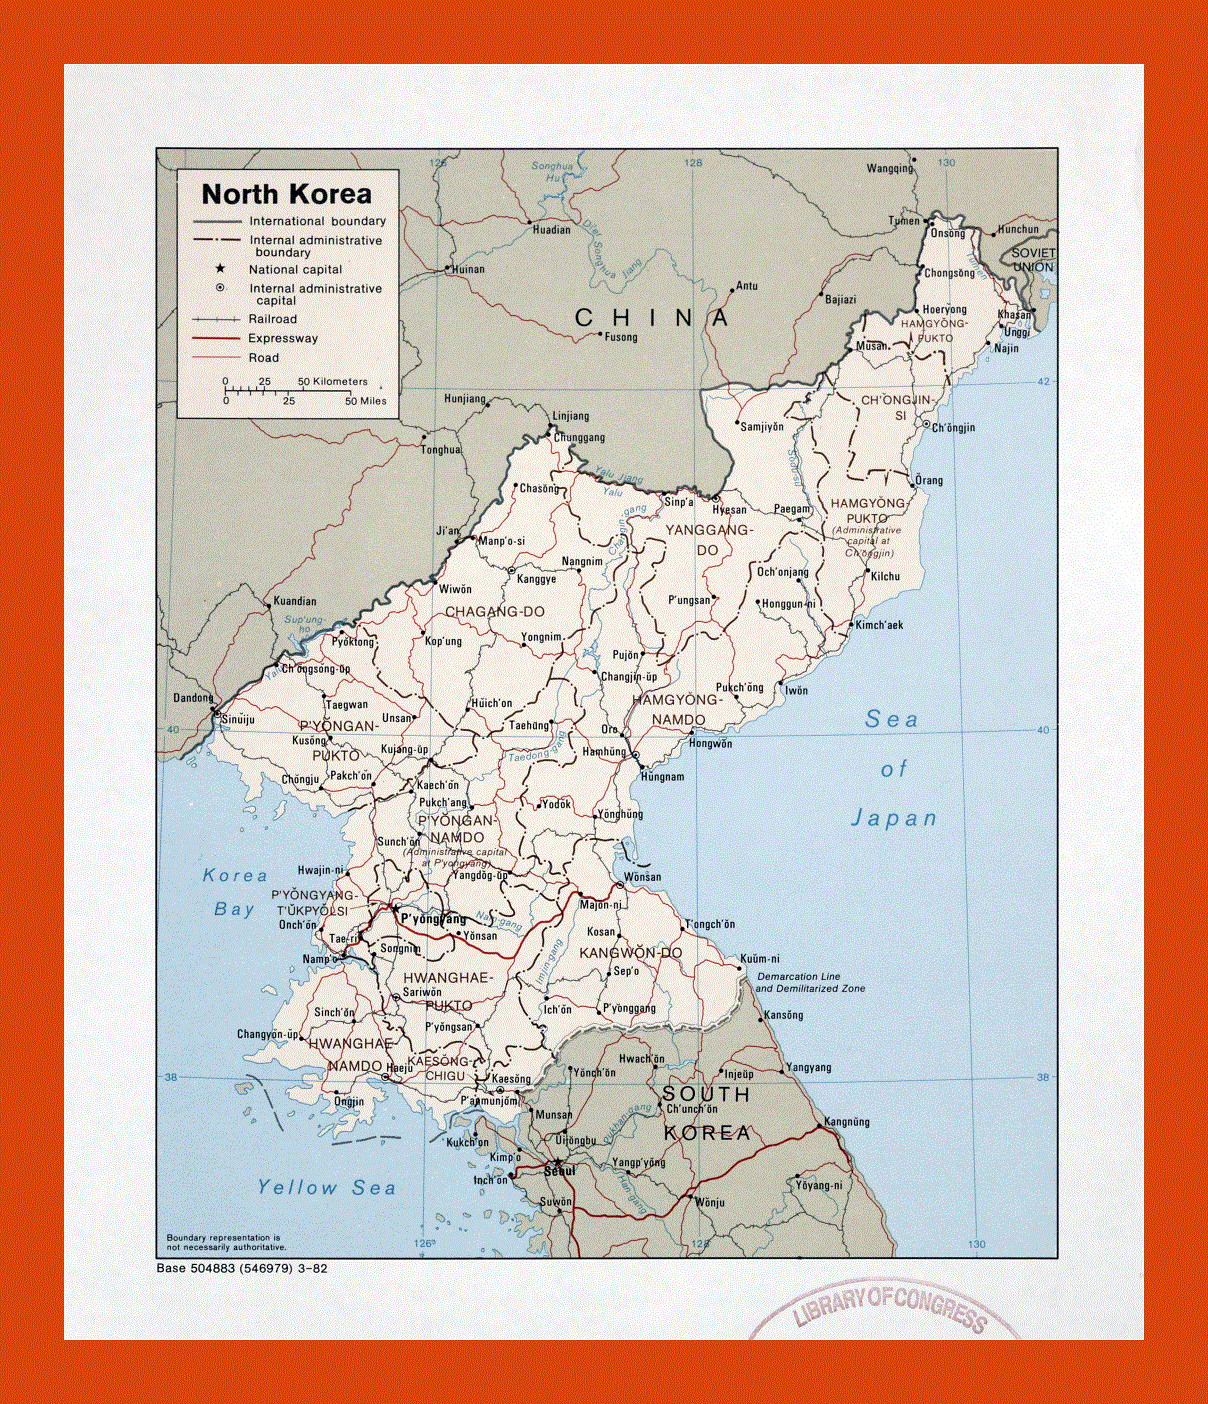 Political and administrative map of North Korea- 1982